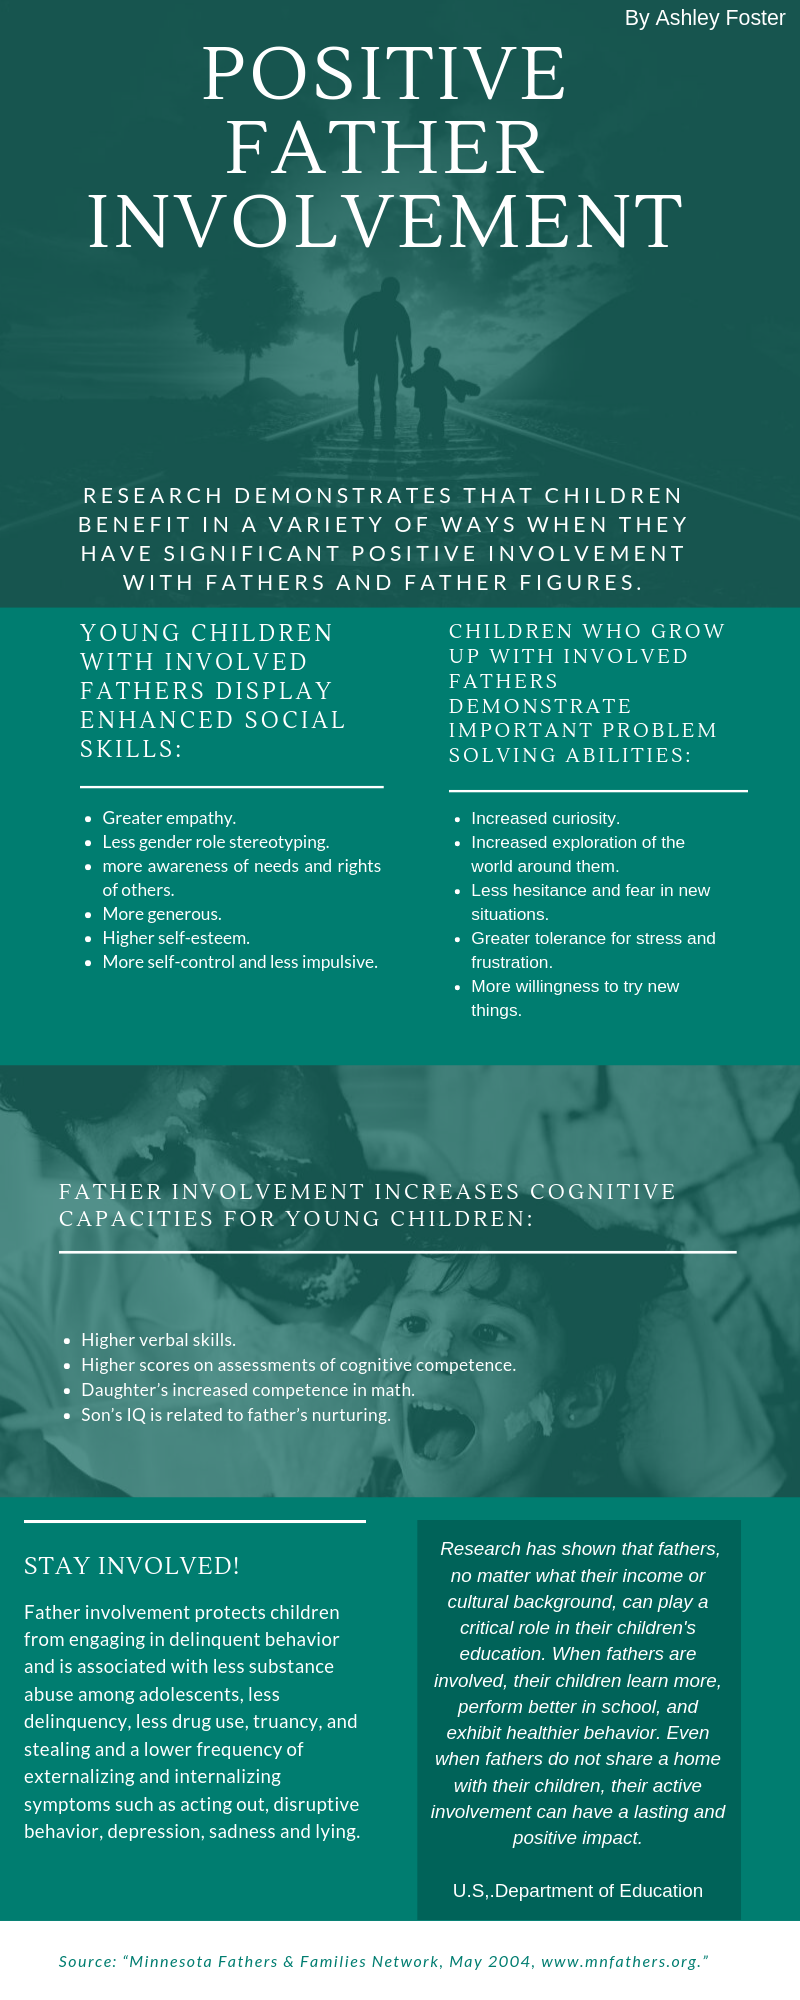 Broad Benefits for Kids1 Young children with involved fathers display enhanced social skills: • Greater empathy; • Less gender role stereotyping; • More awareness of needs and rights of others; • More generous; • Higher self-esteem; • More self-control and less impulsive. Children who grow up with involved fathers demonstrate important problem solving abilities: • Increased curiosity; • Increased exploration of the world around them; • Less hesitance and fear in new situations; • Greater tolerance for stress and frustration; • More willingness to try new things. Father involvement increases cognitive capacities for young children: • Higher verbal skills; • Higher scores on assessments of cognitive competence; • Daughter’s increased competence in math; • Son’s IQ is related to father’s nurturing."Research has shown that fathers, no matter what their income or cultural background, can play a critical role in their children's education. When fathers are involved, their children learn more, perform better in school, and exhibit healthier behavior. Even when fathers do not share a home with their children, their active involvement can have a lasting and positive impact."